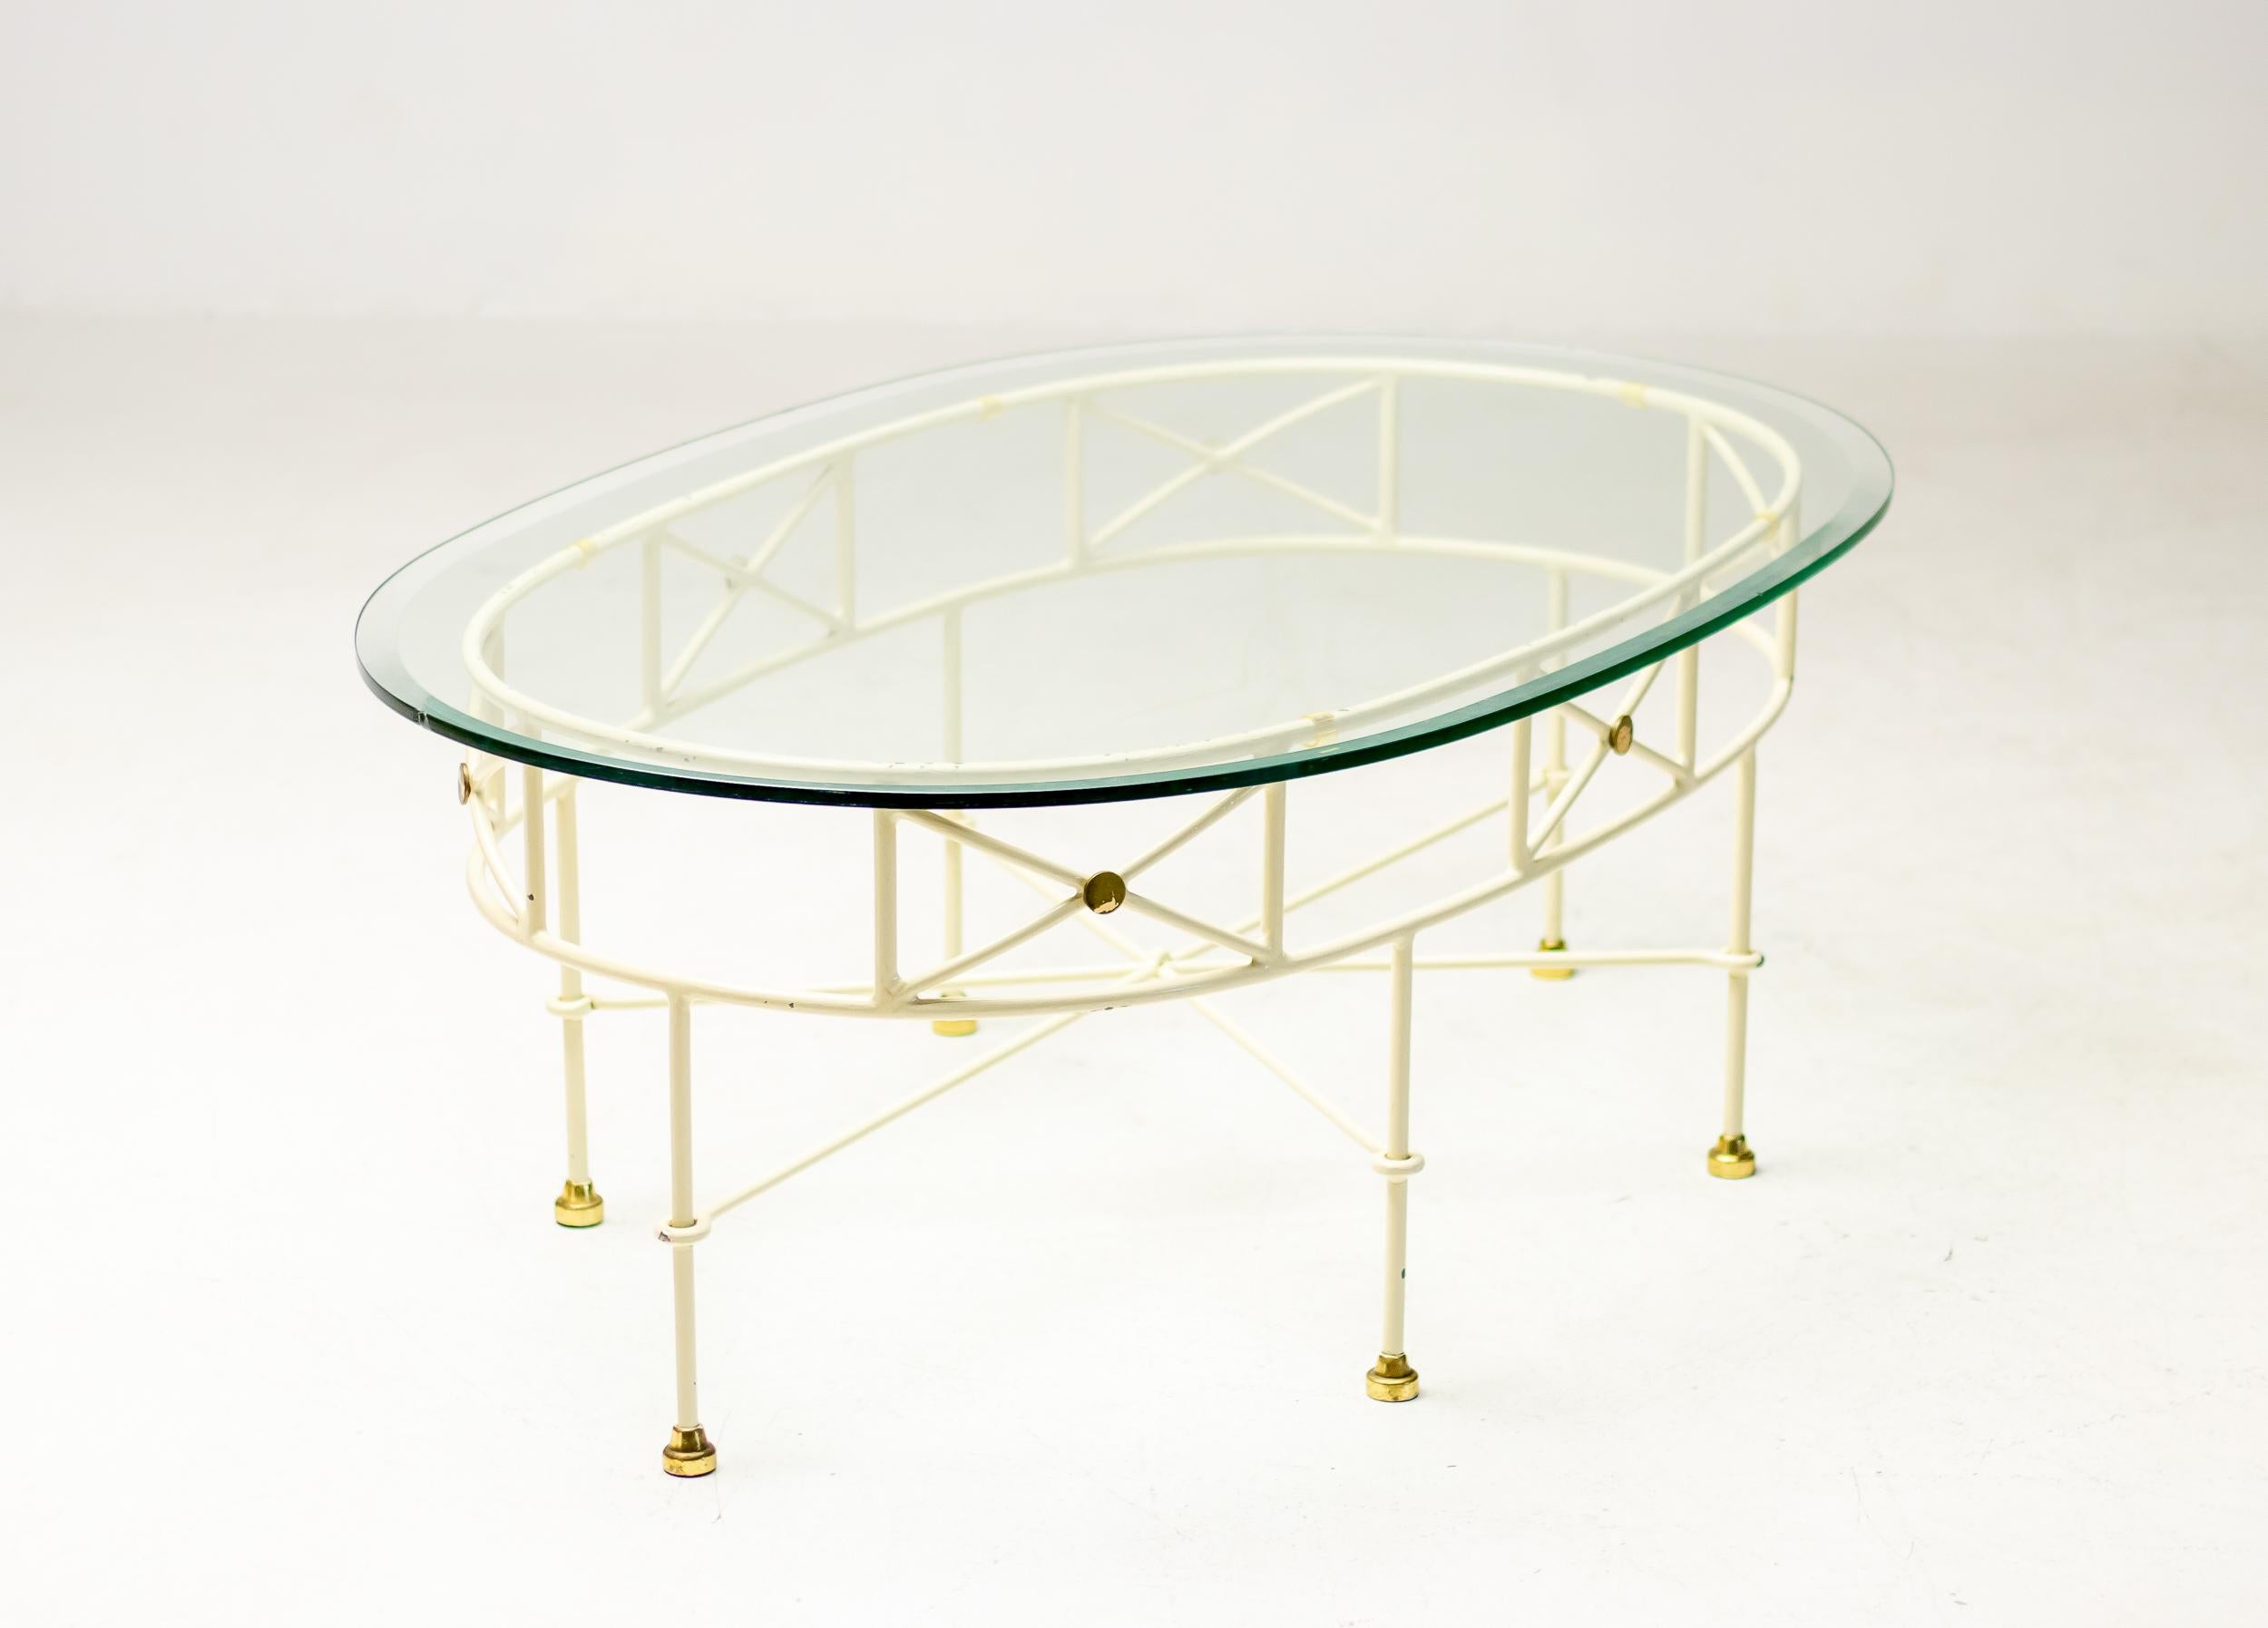 Elegant Mid-Century Modern Italian oval glass top coffee table.
White enameled steel base with brass feet and bevelled crystal glass top.
Beautiful presence.